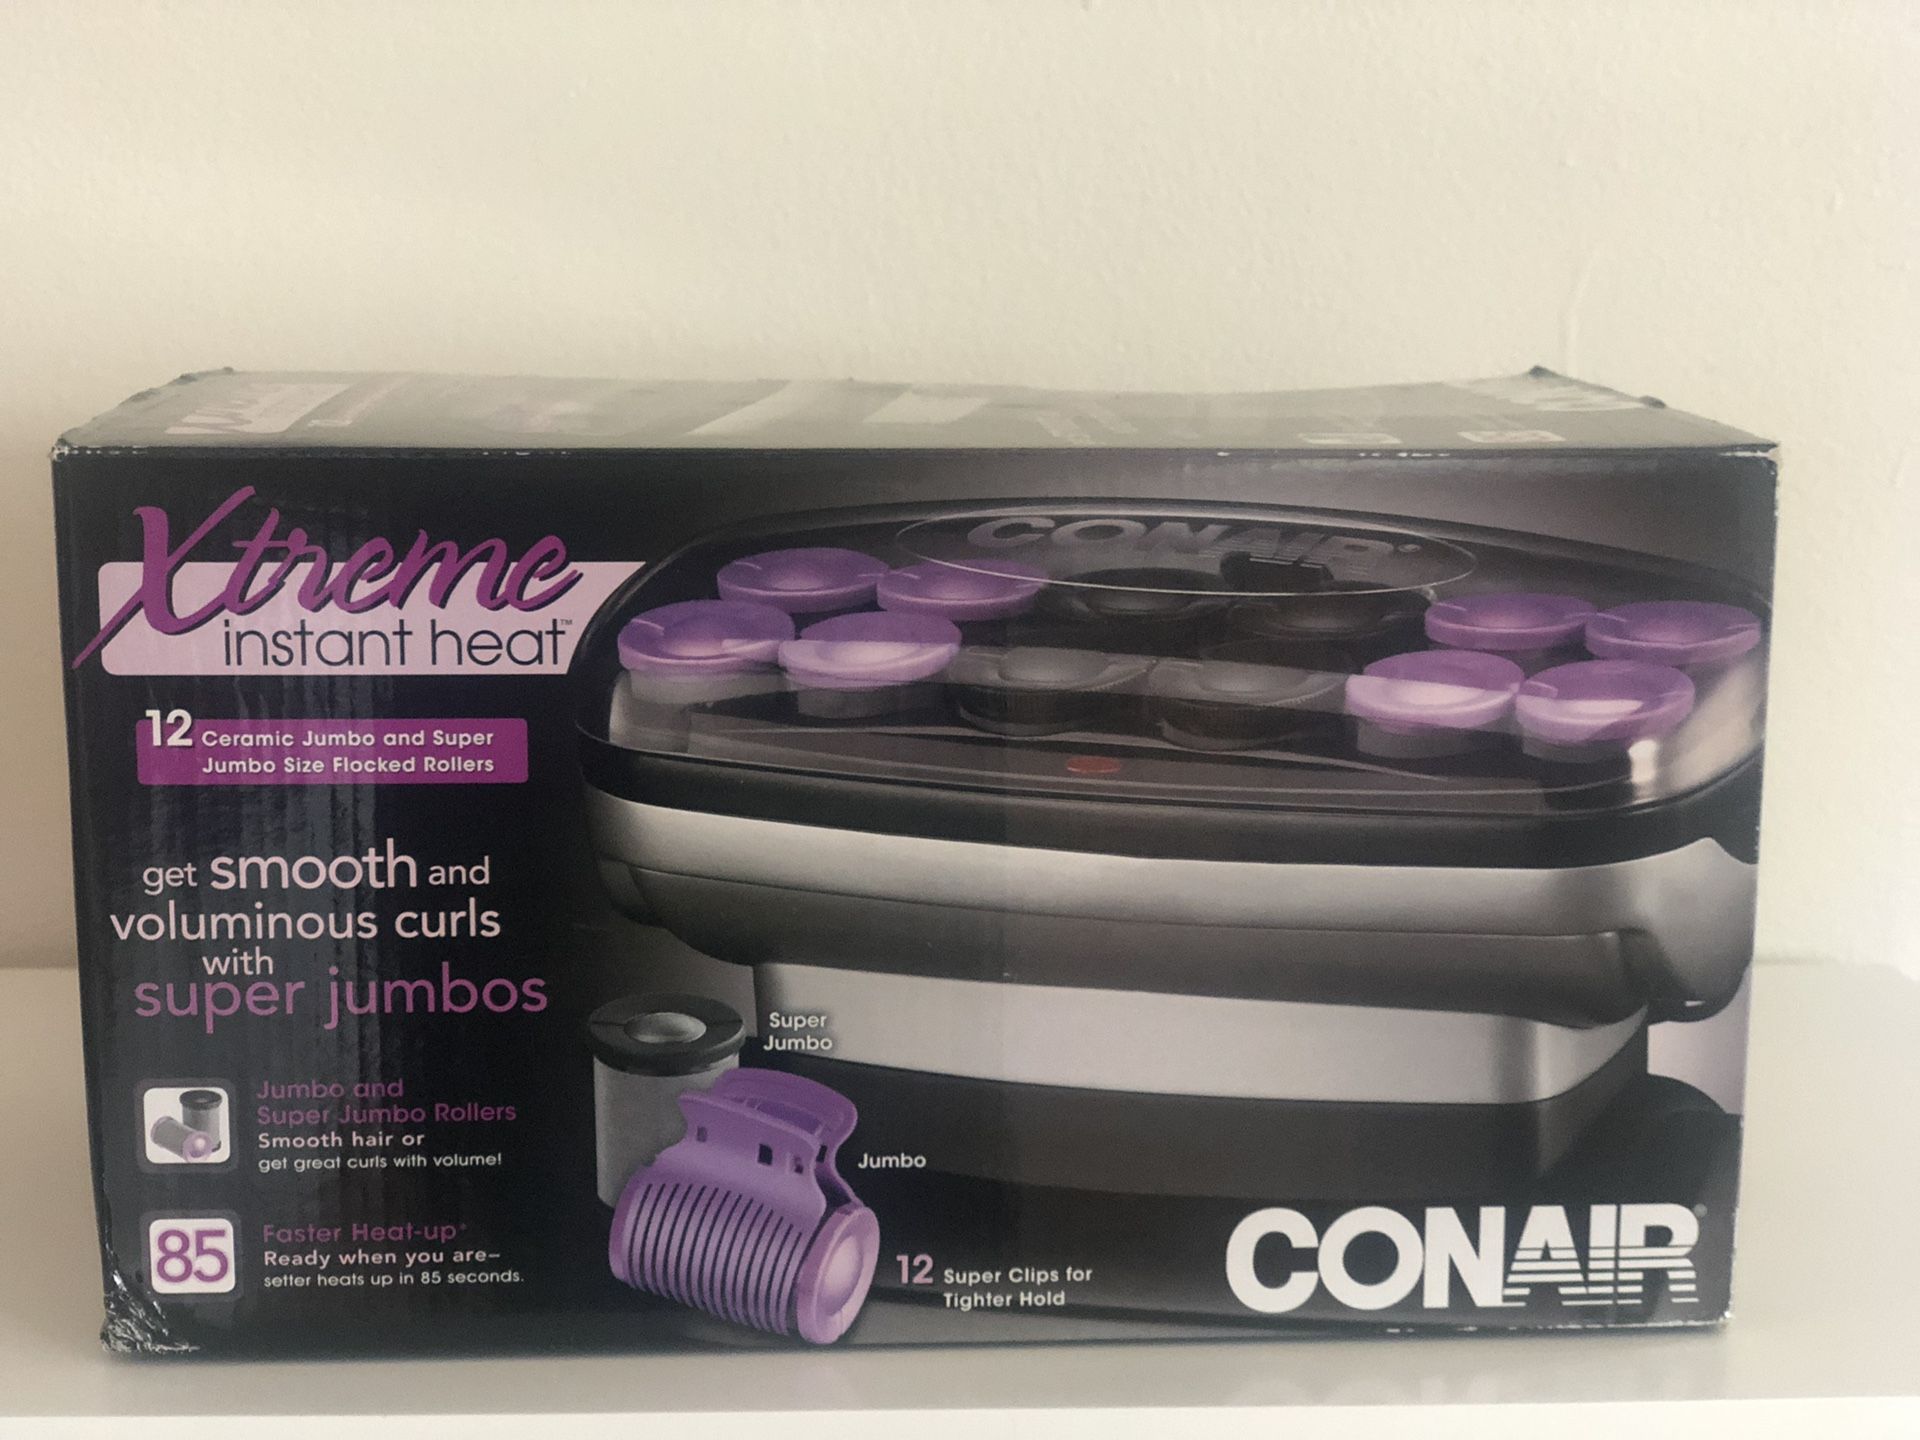 Conair xtreme instant heat hot rollers